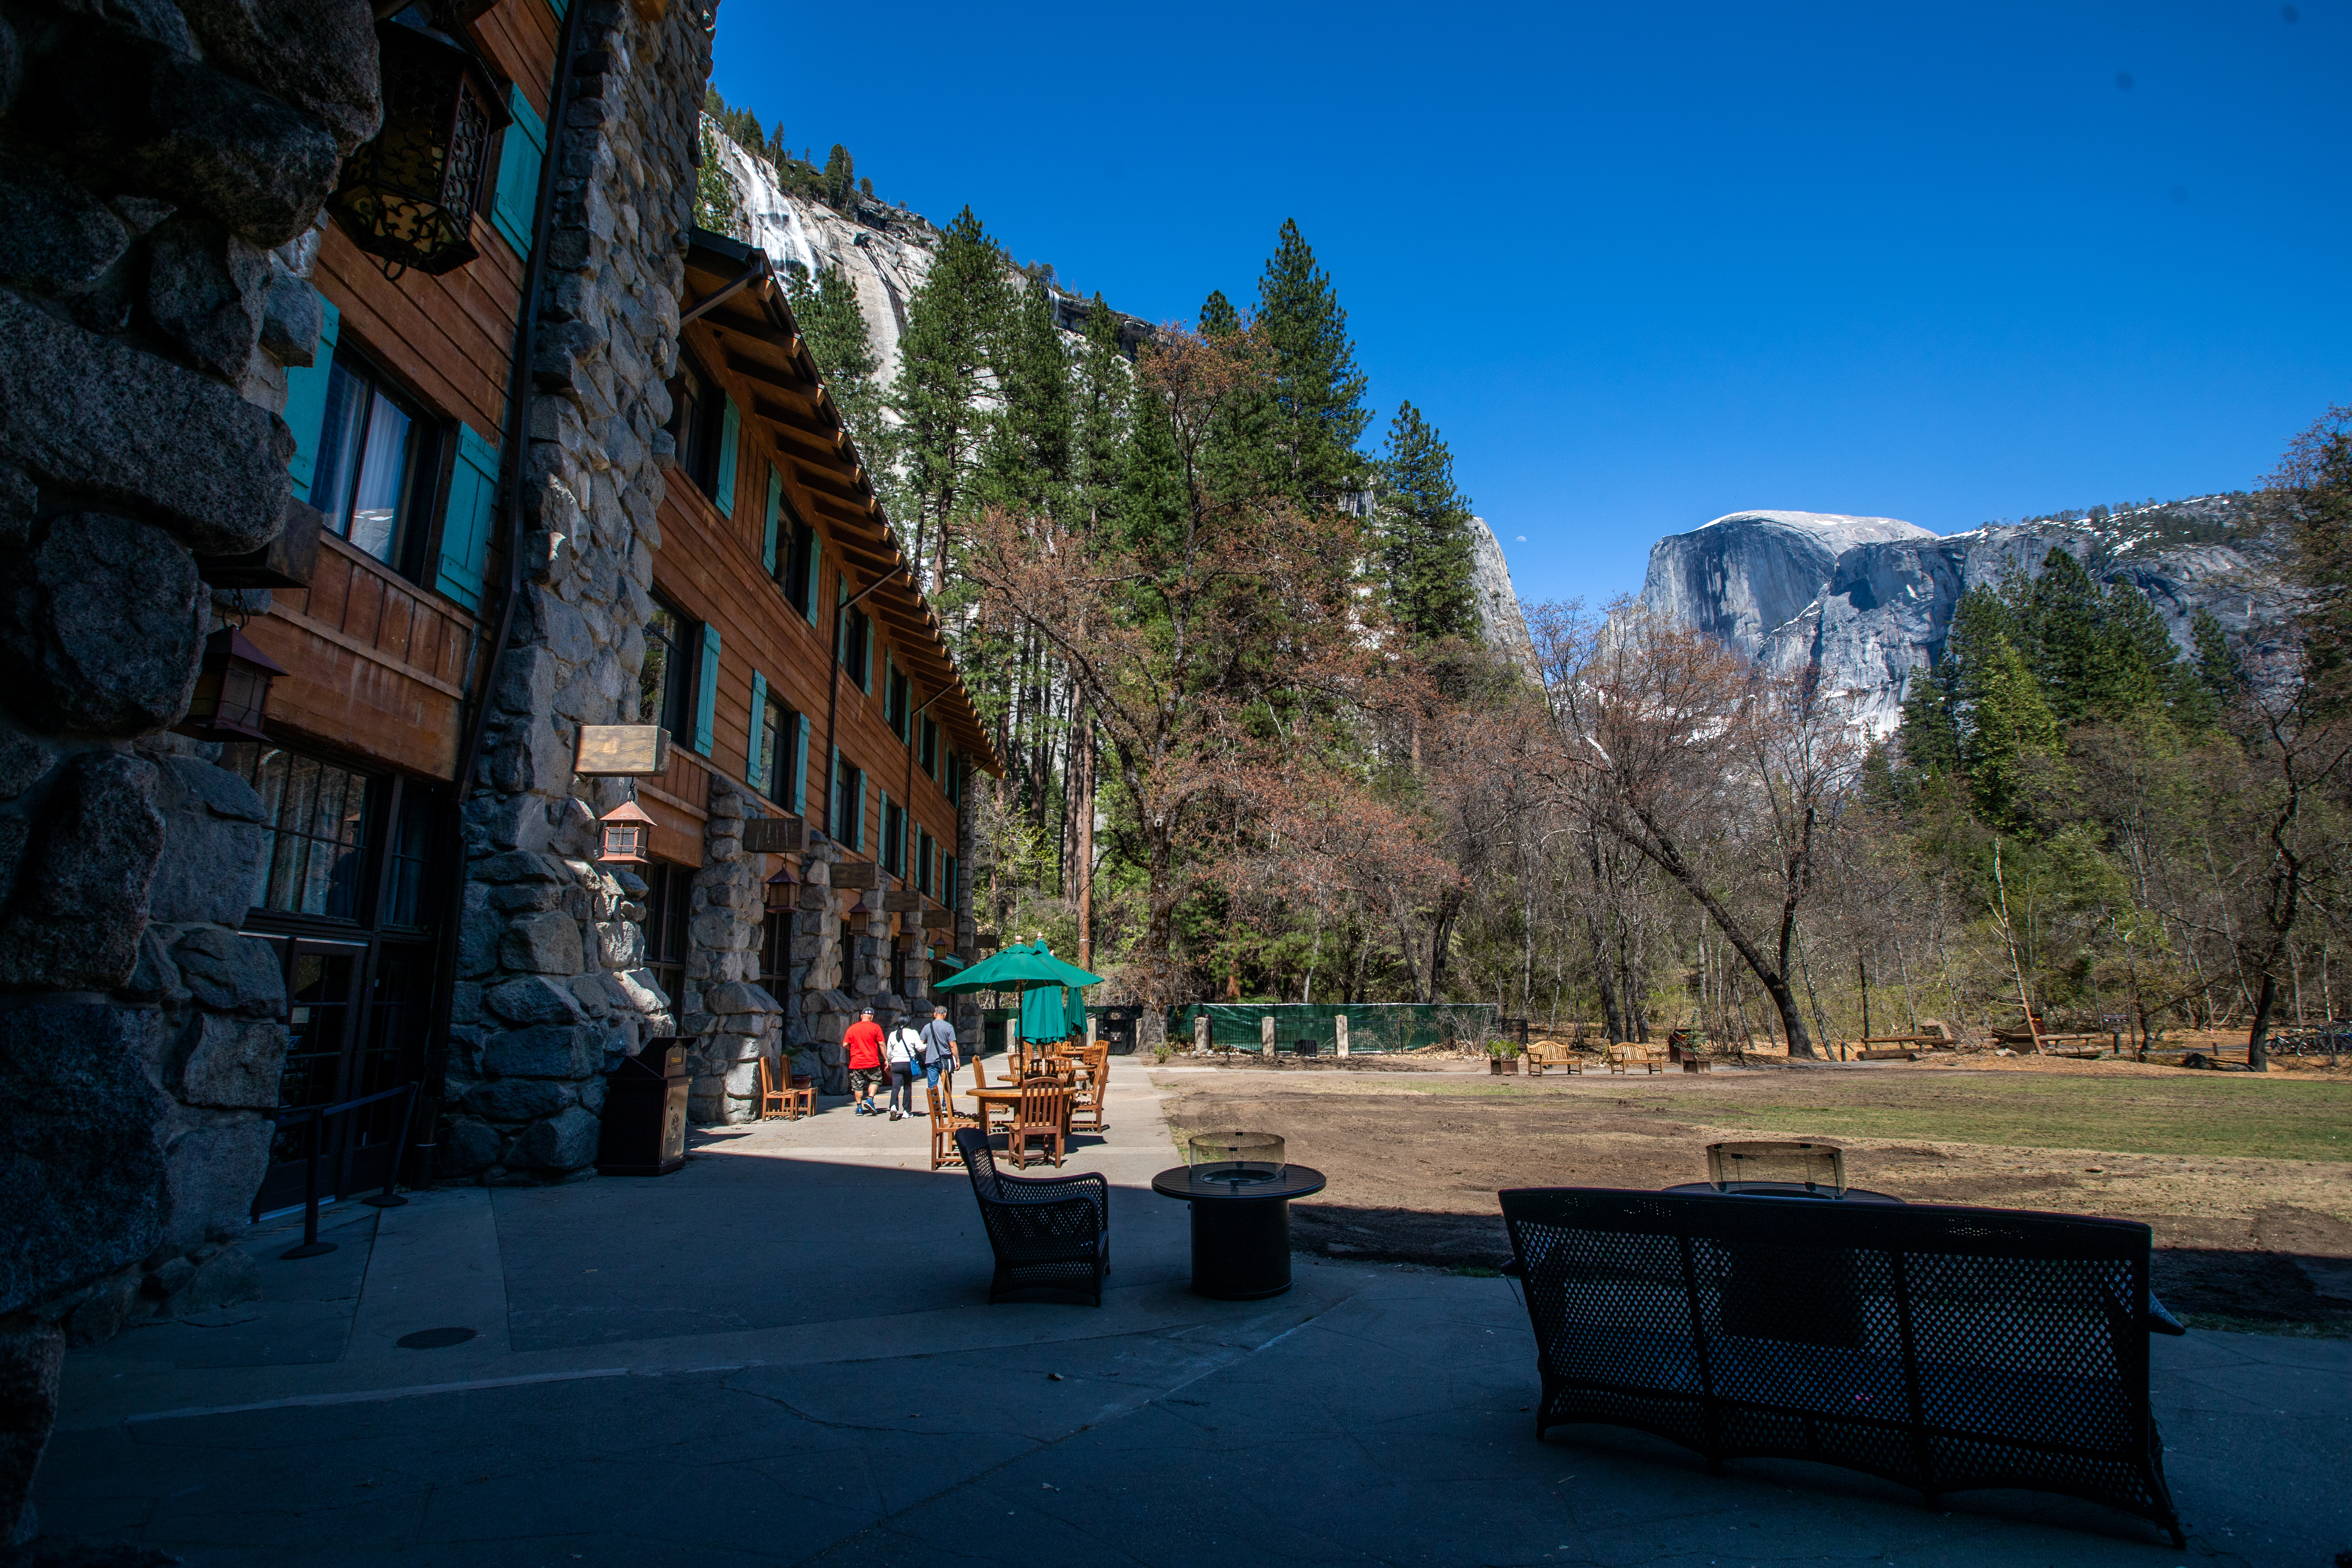 The Ahwahnee Hotel on Friday, April 28, 2023, in Yosemite National Park.